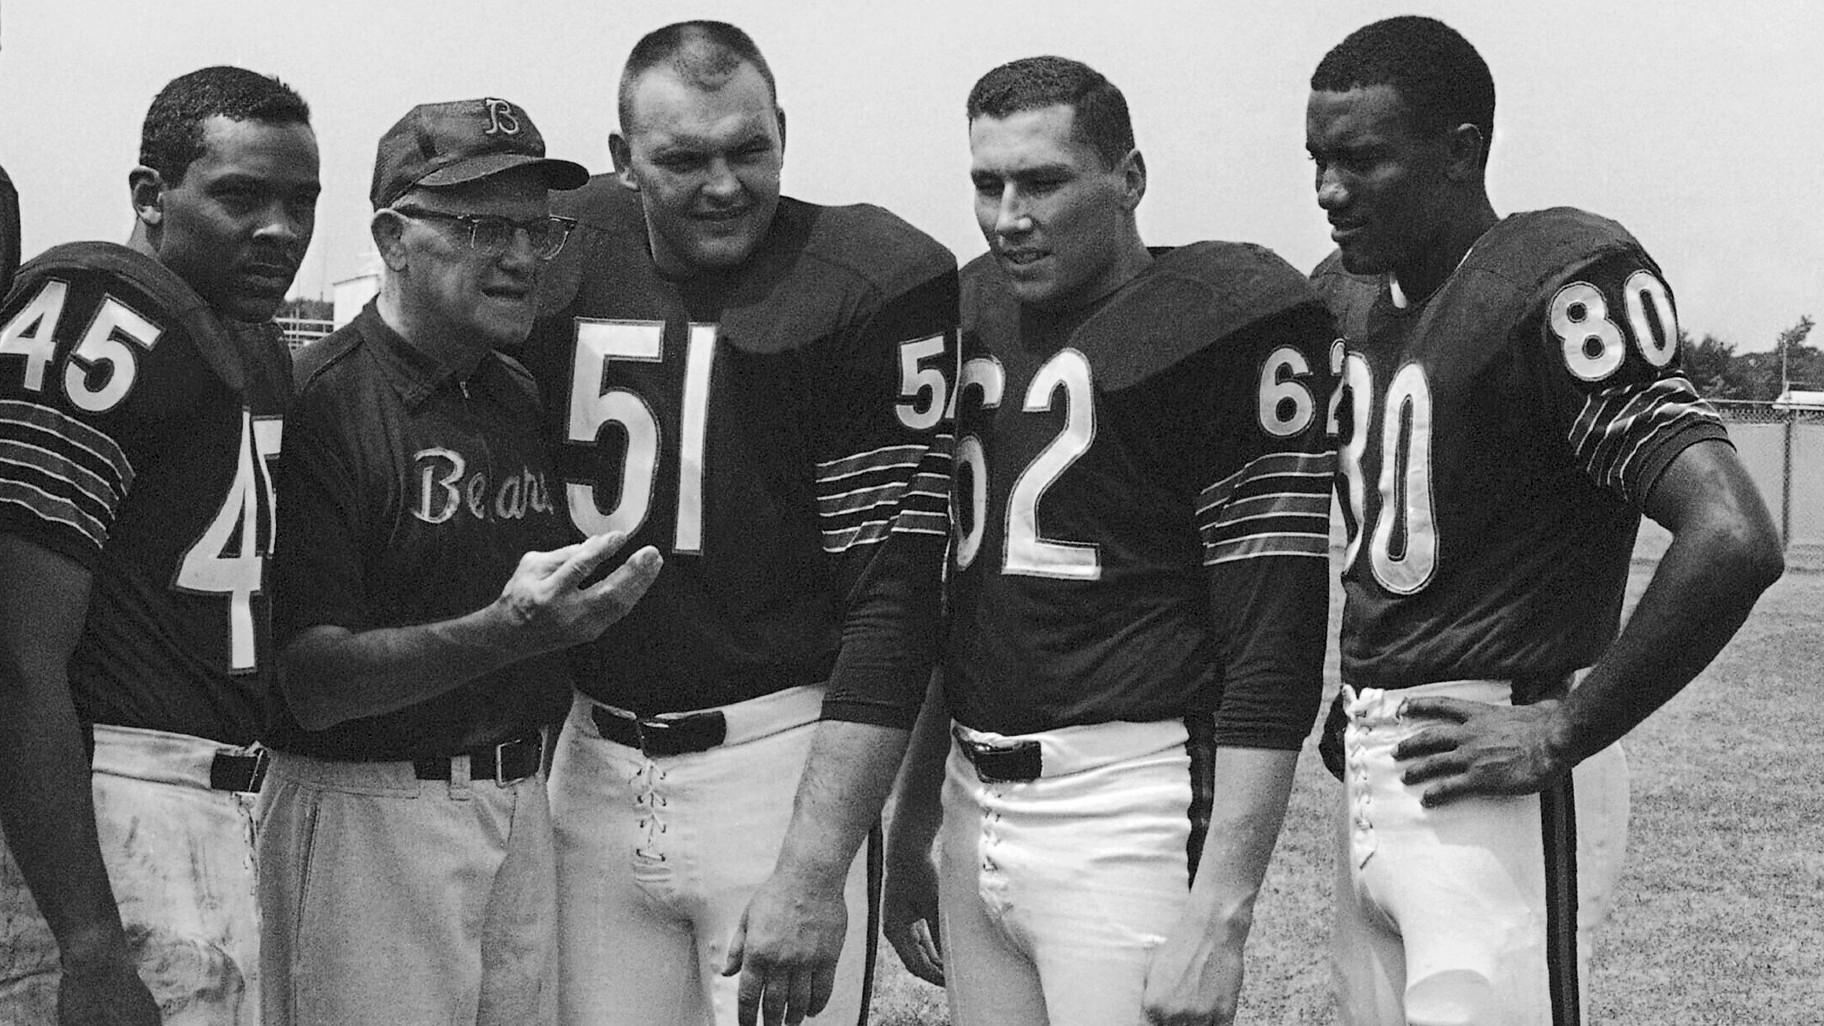 FILE - Chicago Bears coach George Halas discusses the upcoming season with four of his second-year men at training camp in July 1966 at St. Joseph's College in Rensselaer, Ind. With Halas at picture session are Dick Gordon (45), Dick Butkus (51), Mike Reilly (62) and Jimmy Jones (80). (AP Photo, File)